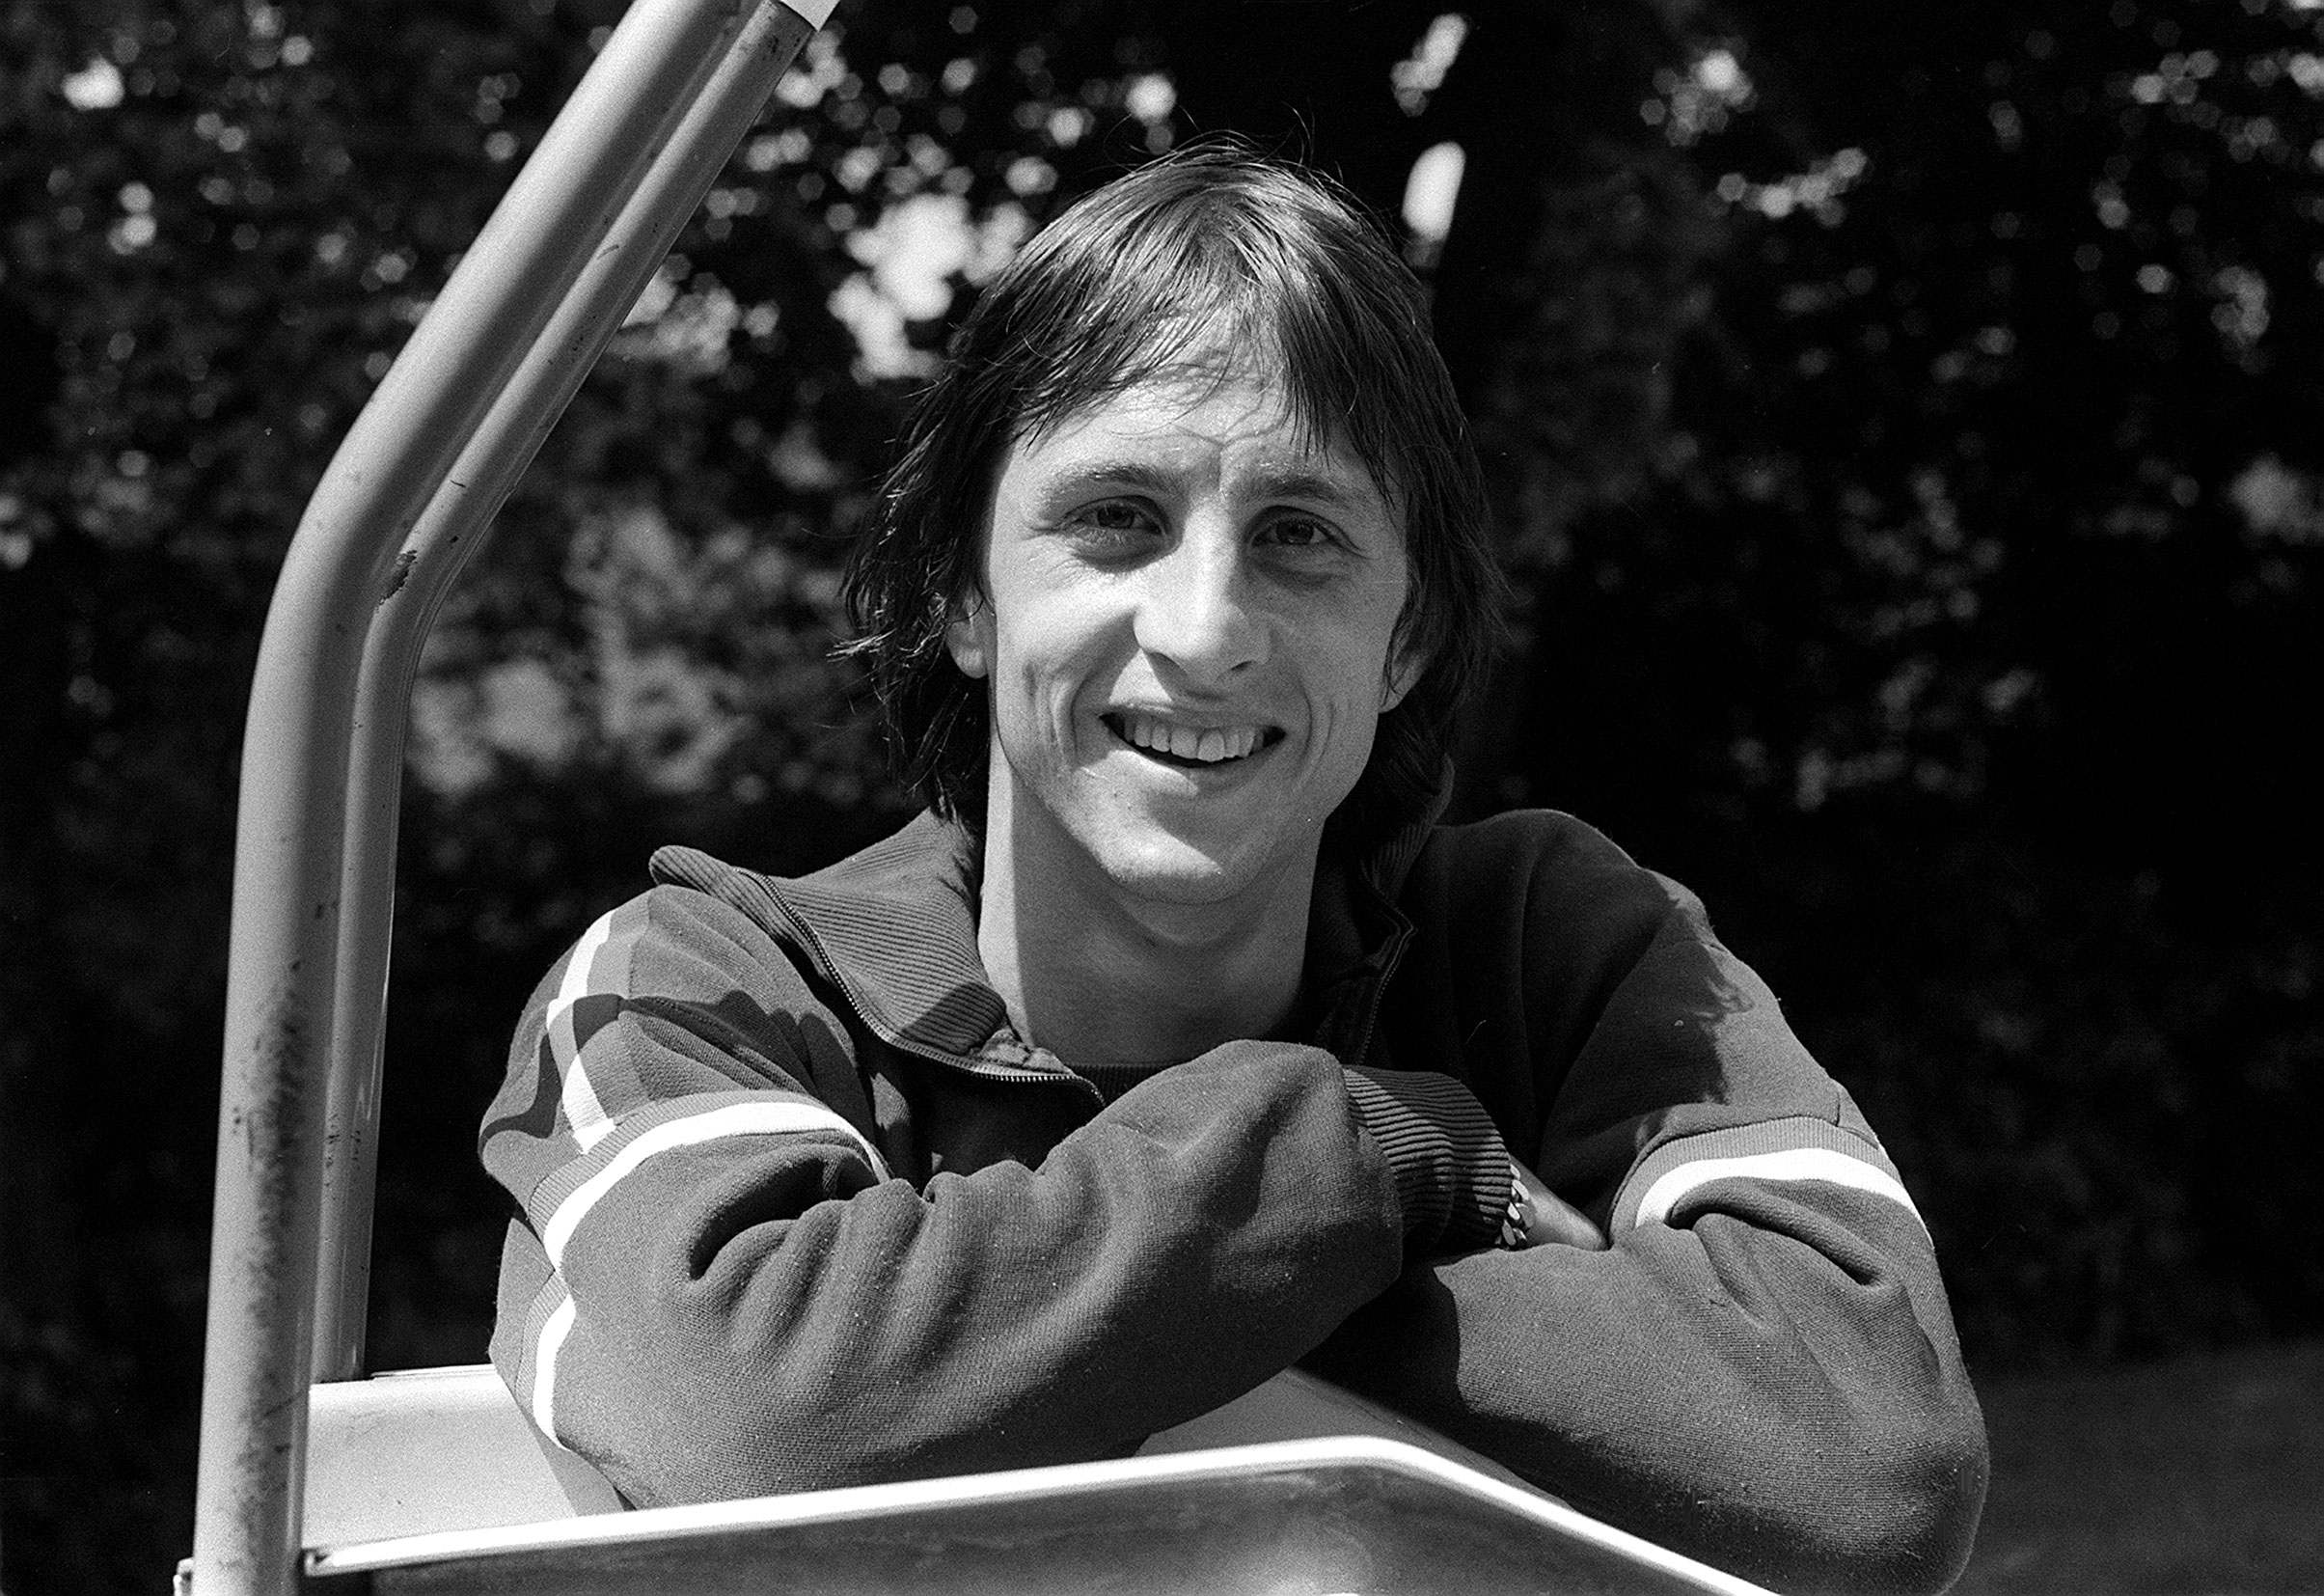 Ajax Amsterdam and Holland footballer Johan Cruyff takes a break from training as Ajax prepare for the European Cup Final against Panathinaikos at Wembley. June 1971. (Photo by Monte Fresco/Mirrorpix via Getty Images)